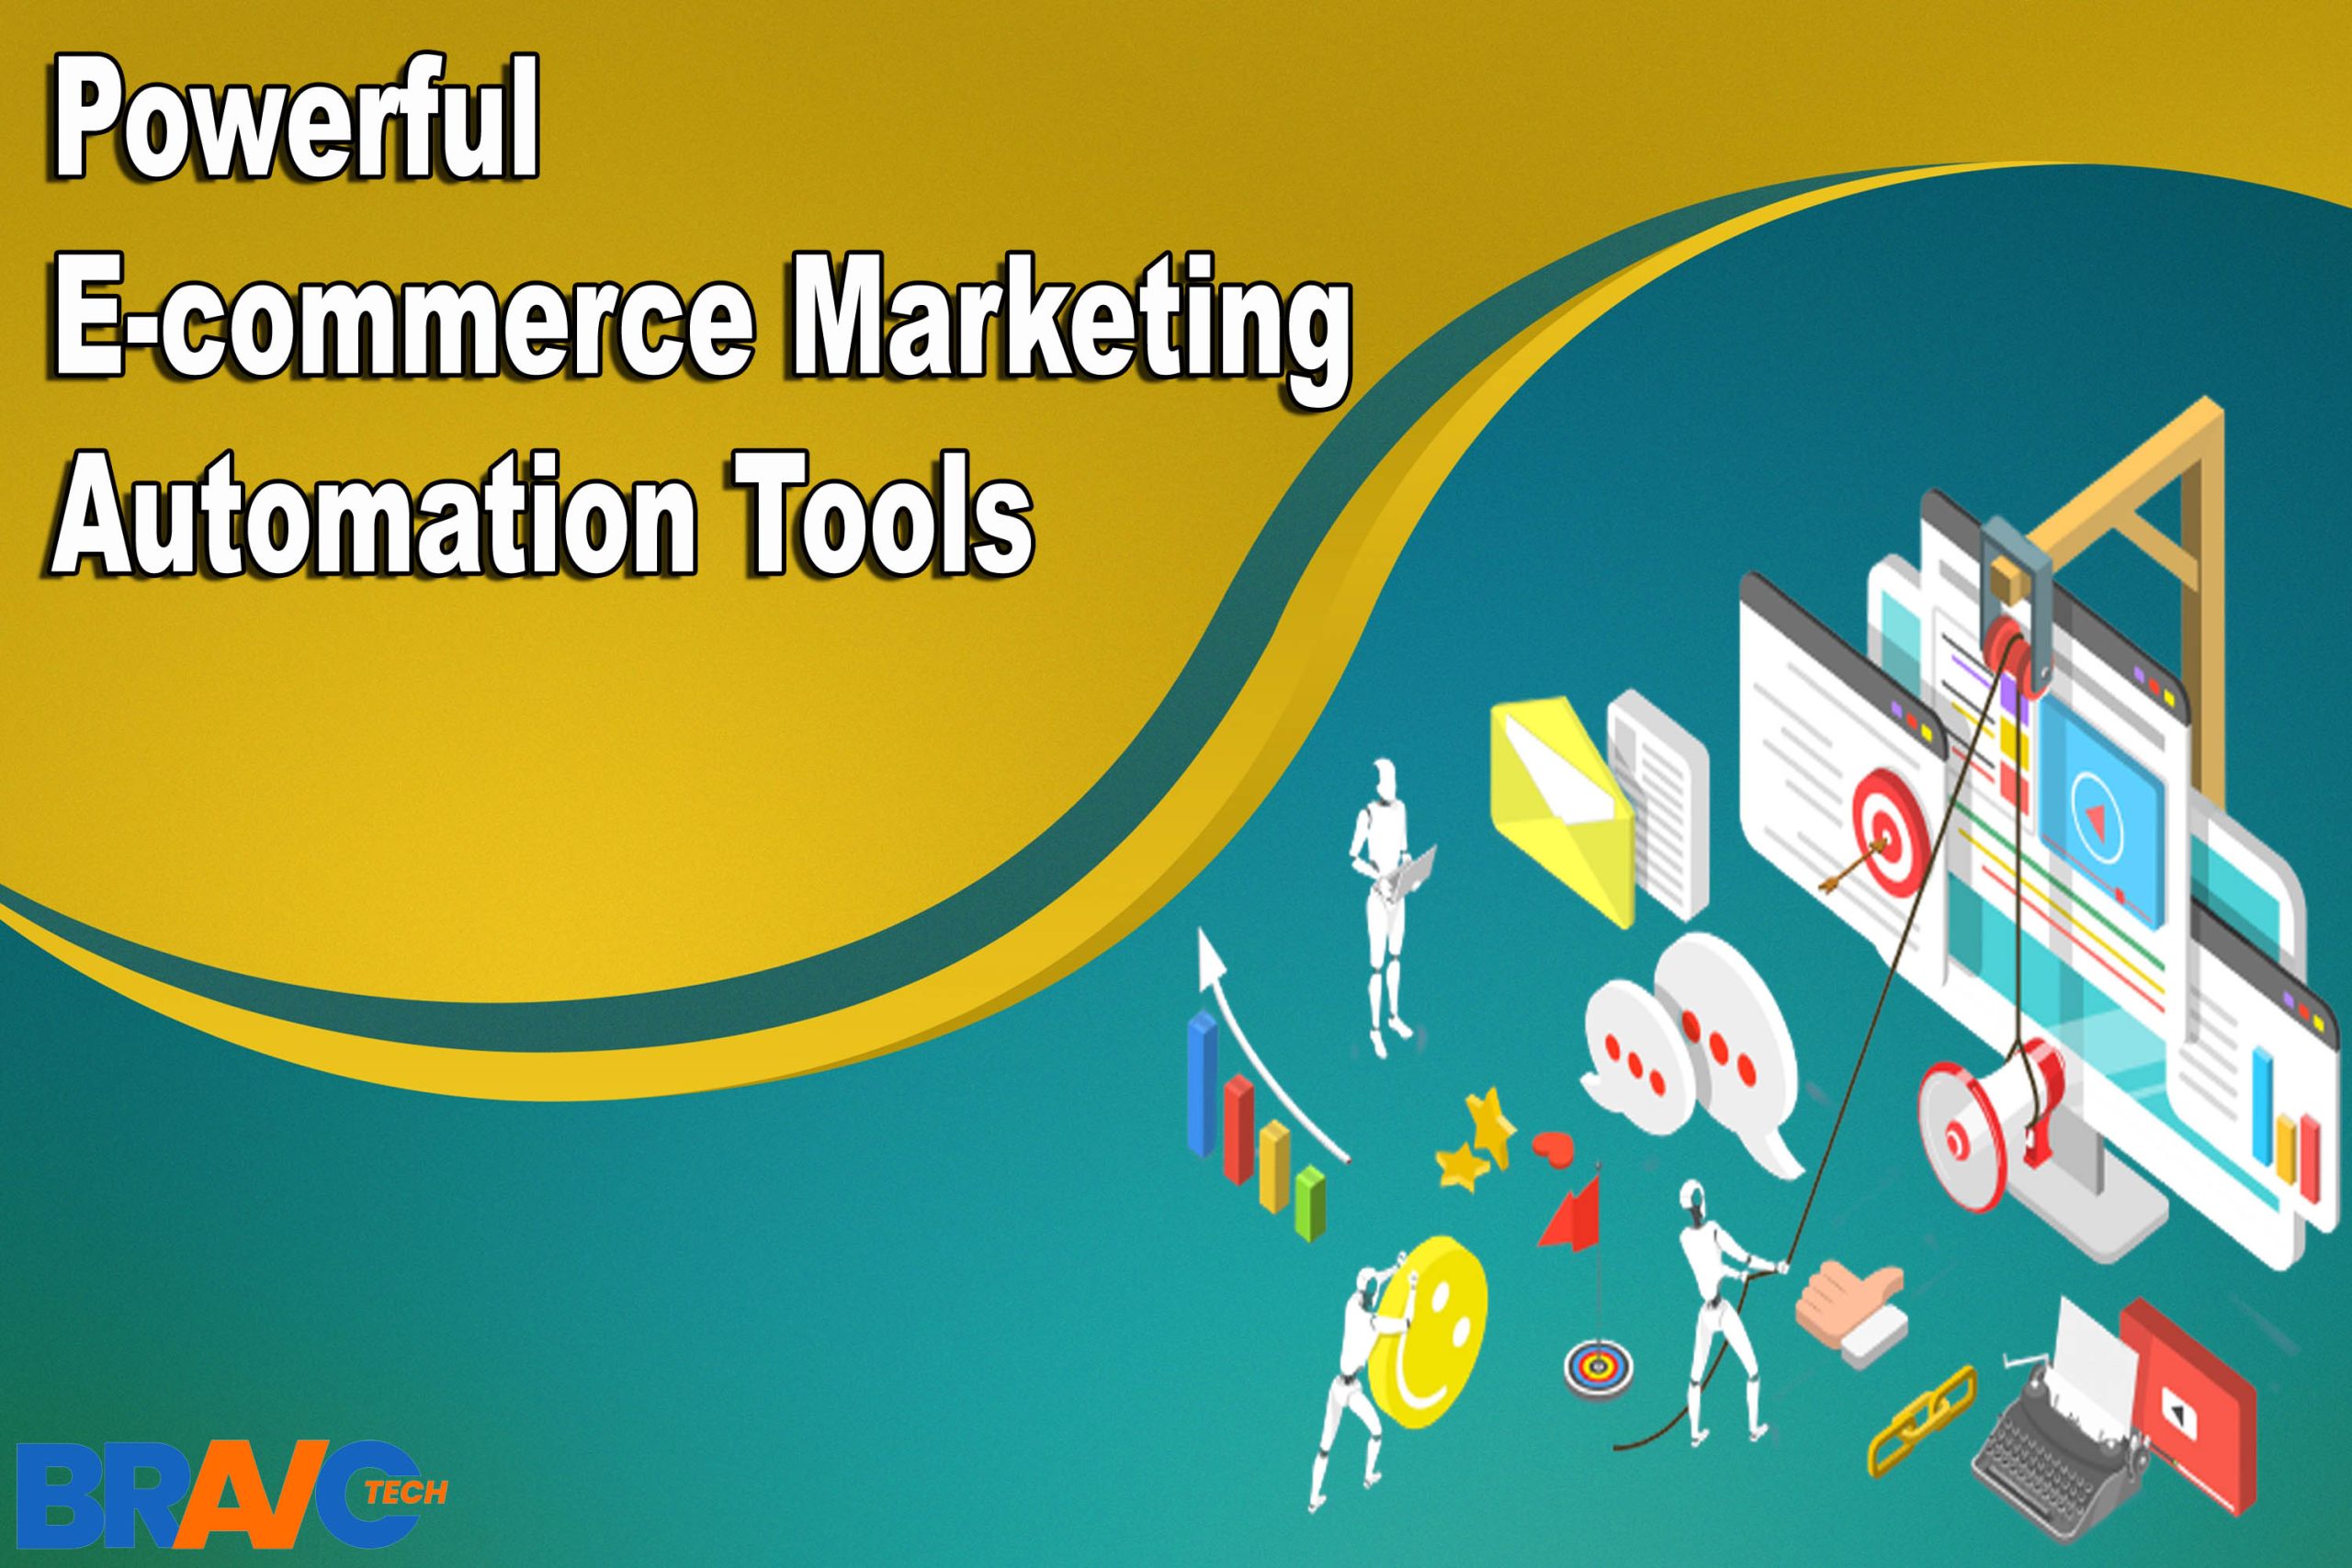 6 Powerful E-commerce Marketing Automation Tools in 2023